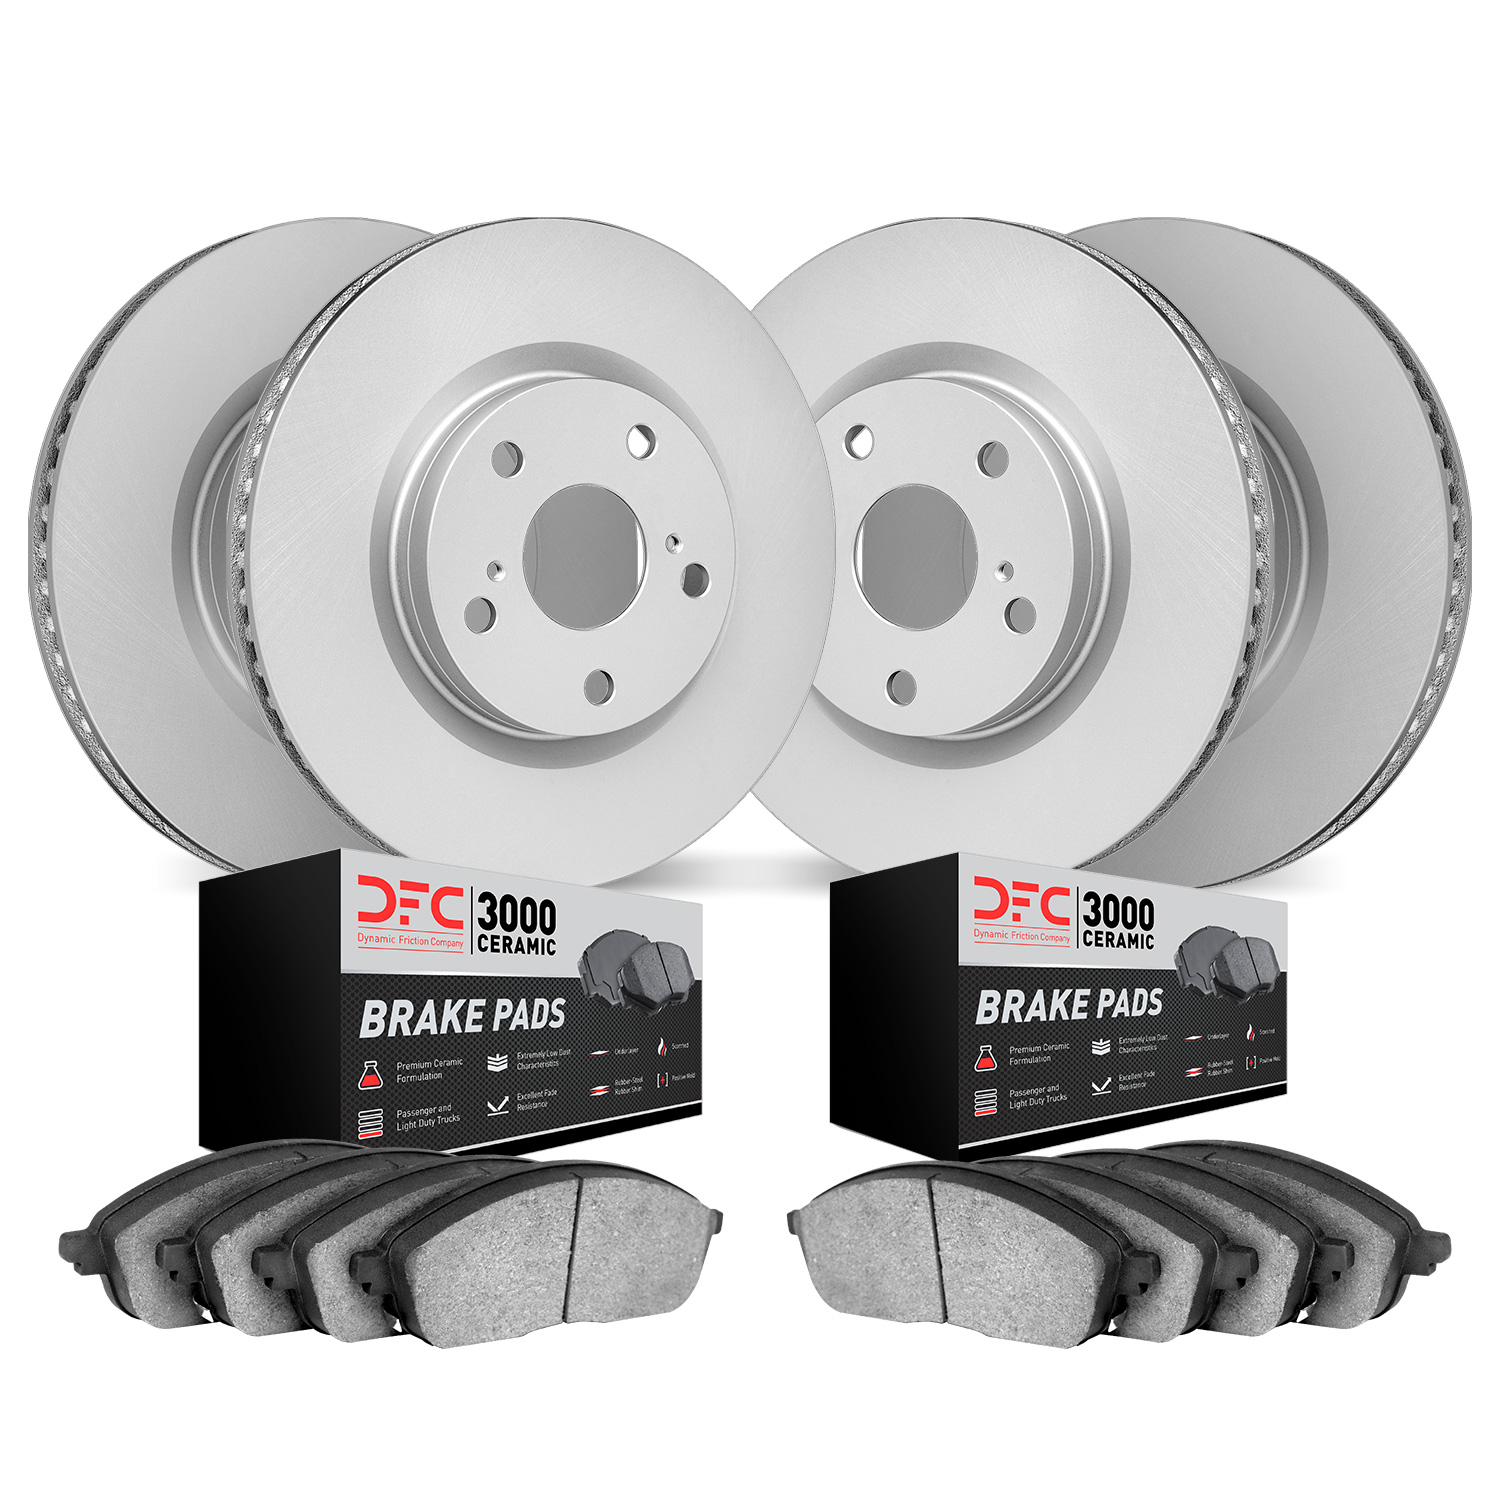 4304-75020 Geospec Brake Rotors with 3000-Series Ceramic Brake Pads Kit, 2007-2017 Lexus/Toyota/Scion, Position: Front and Rear